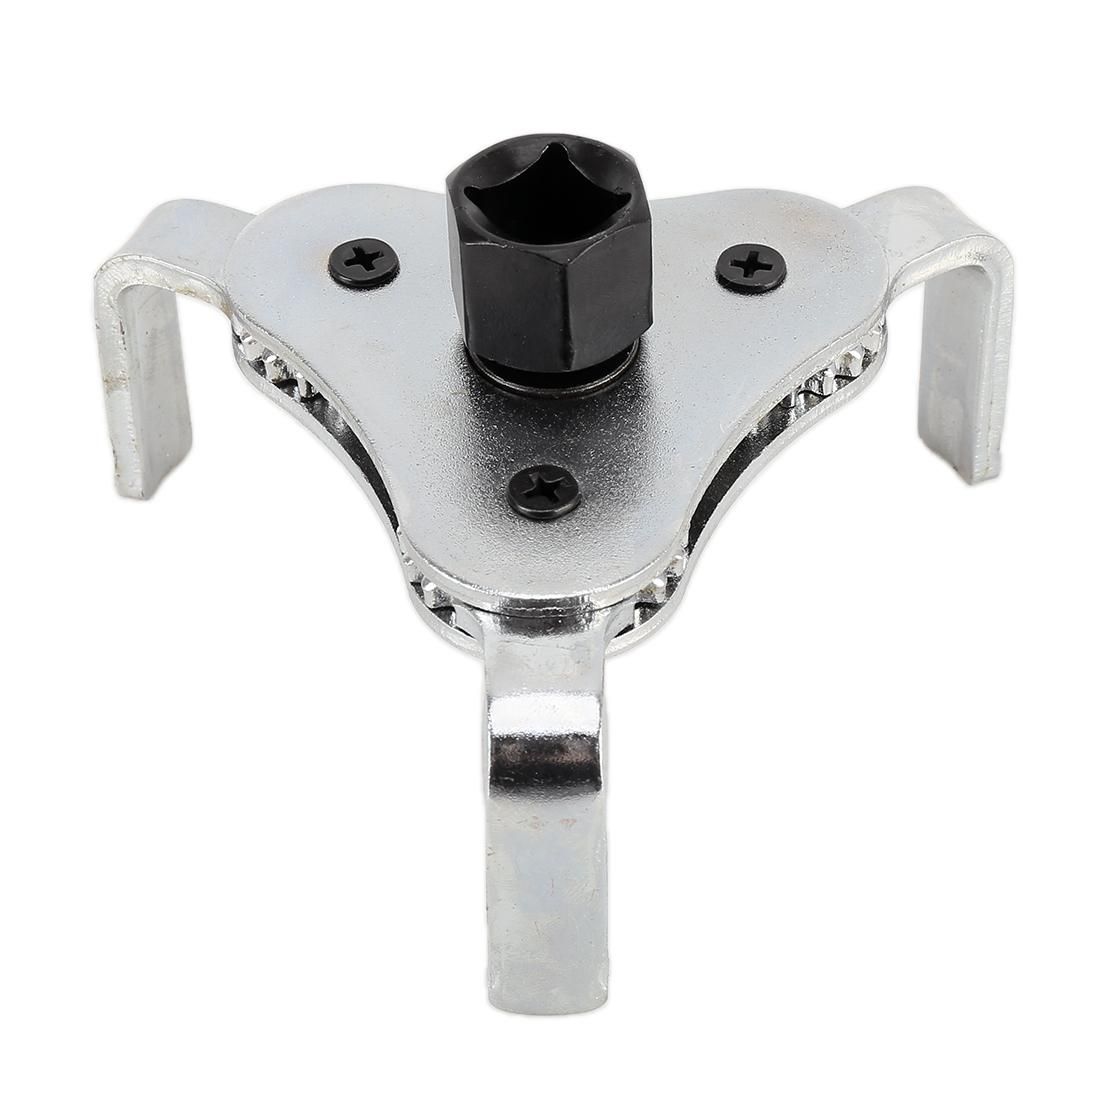 62-102mm Alloy Auto Car Repair Tools Adjustable Two Way Oil Filter Wrench Tool 3 Jaw Remover Tool for Cars Trucks TH4